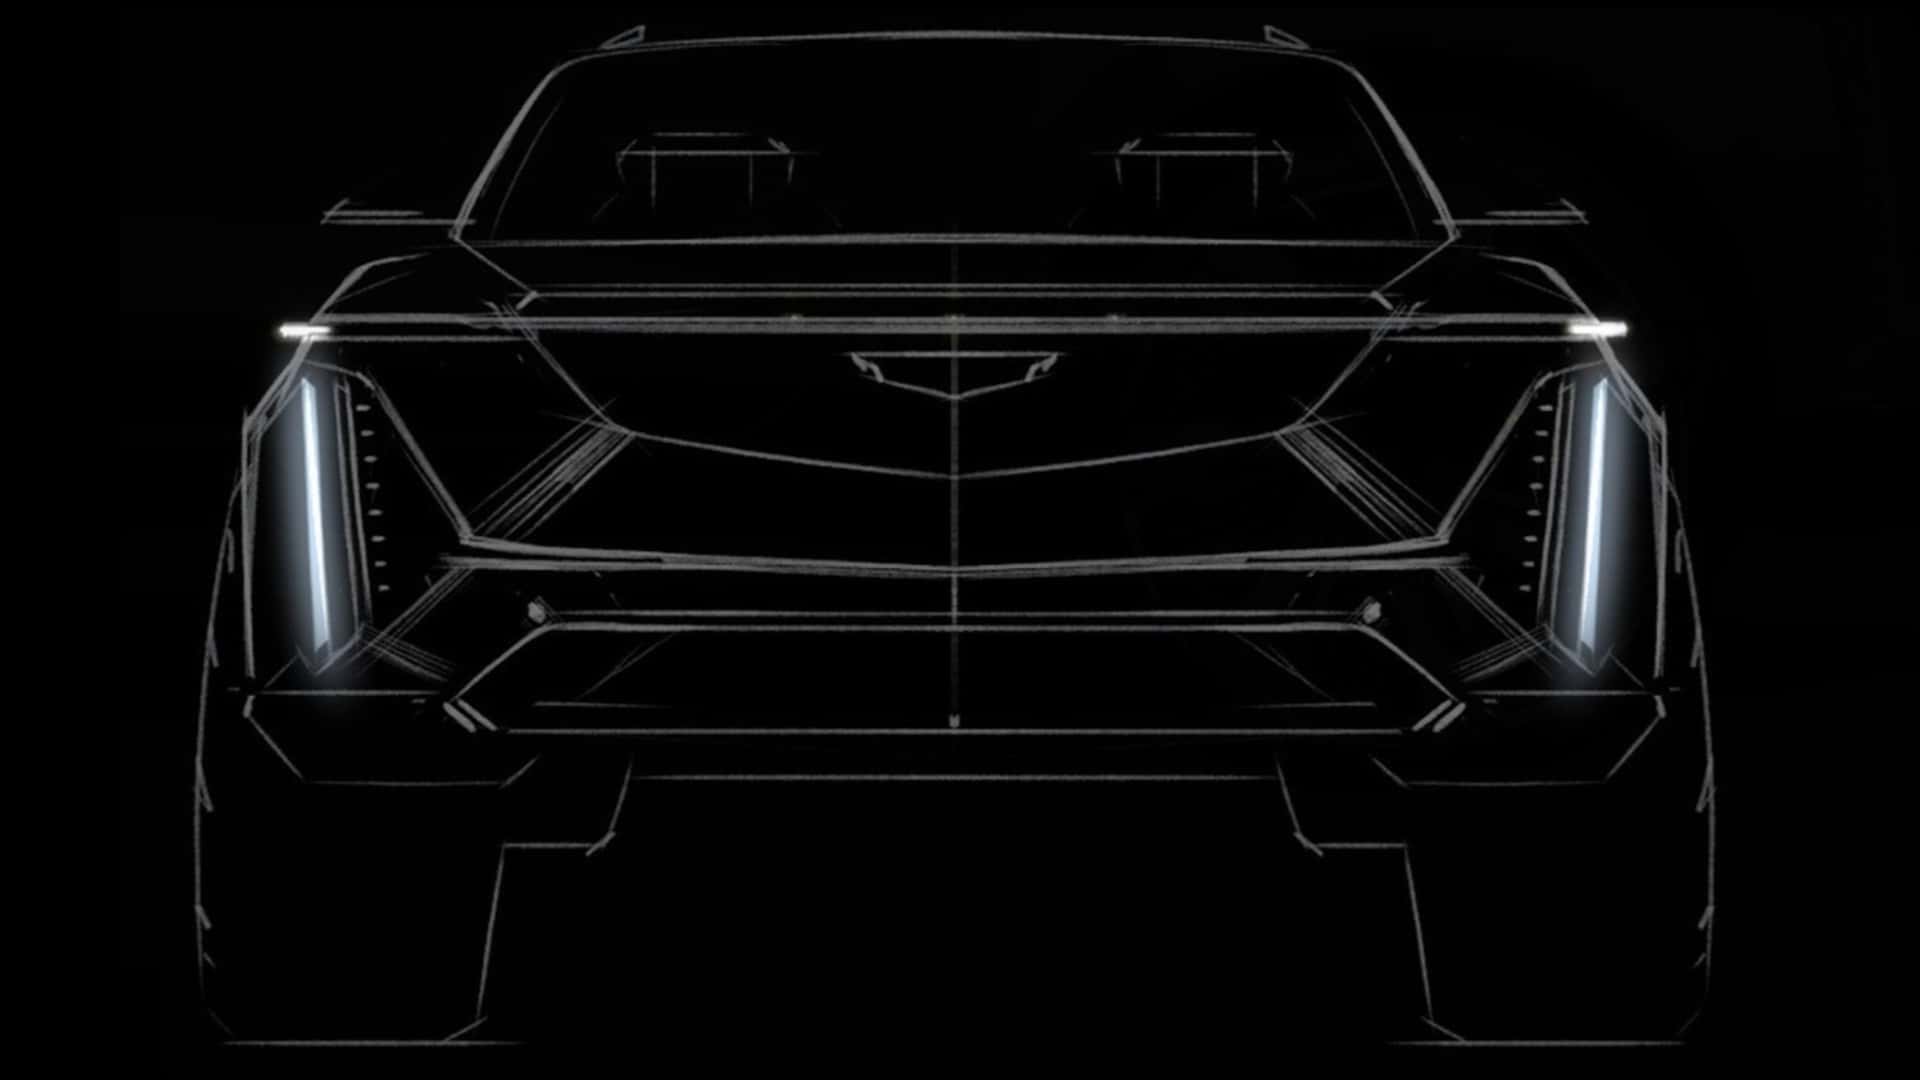 gm releases cadillac escalade iq design sketches, execution seems on point